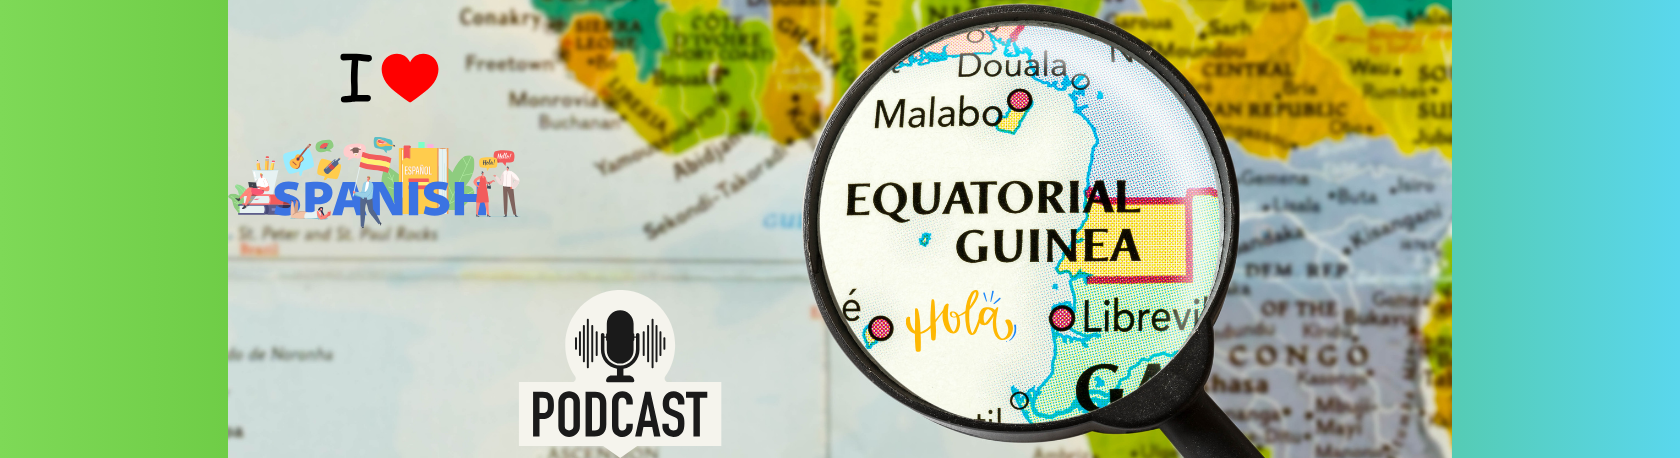 Enrich your Spanish listening skills and find out why at Equatorial Guinea ‘Se habla español’